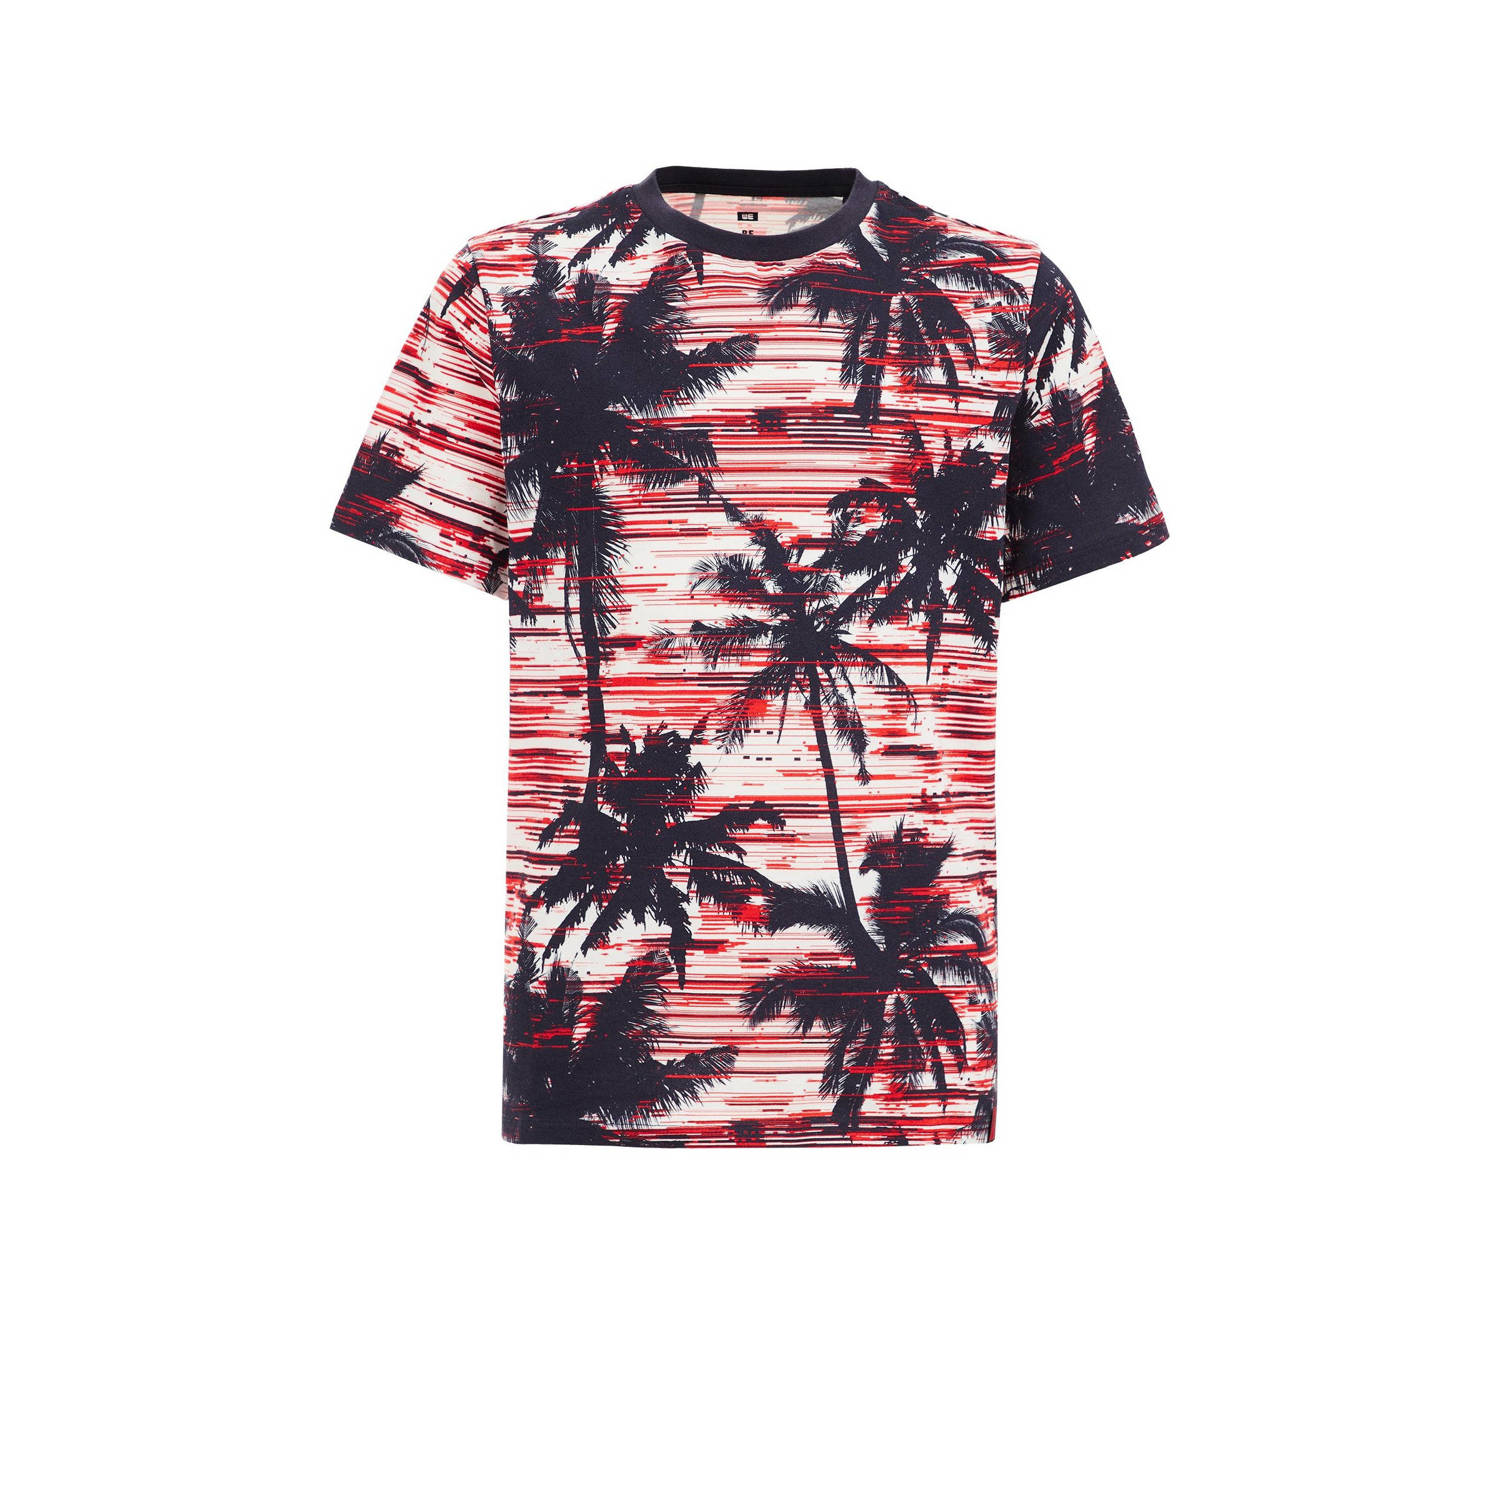 WE Fashion T-shirt met all over print rood zwart wit